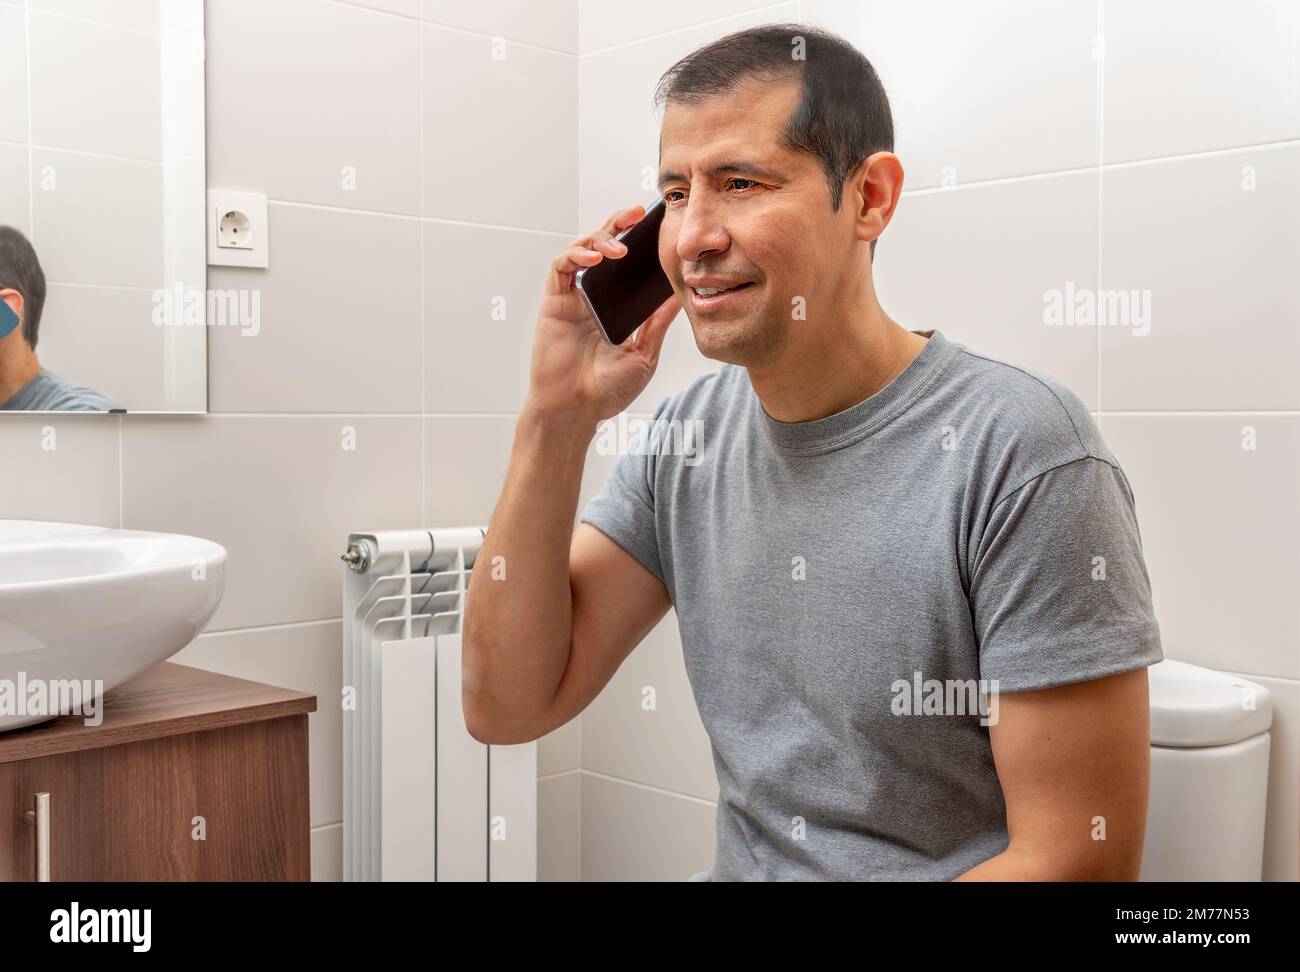 Shot of a man using a phone while sitting on the toilet in a bathroom Stock Photo